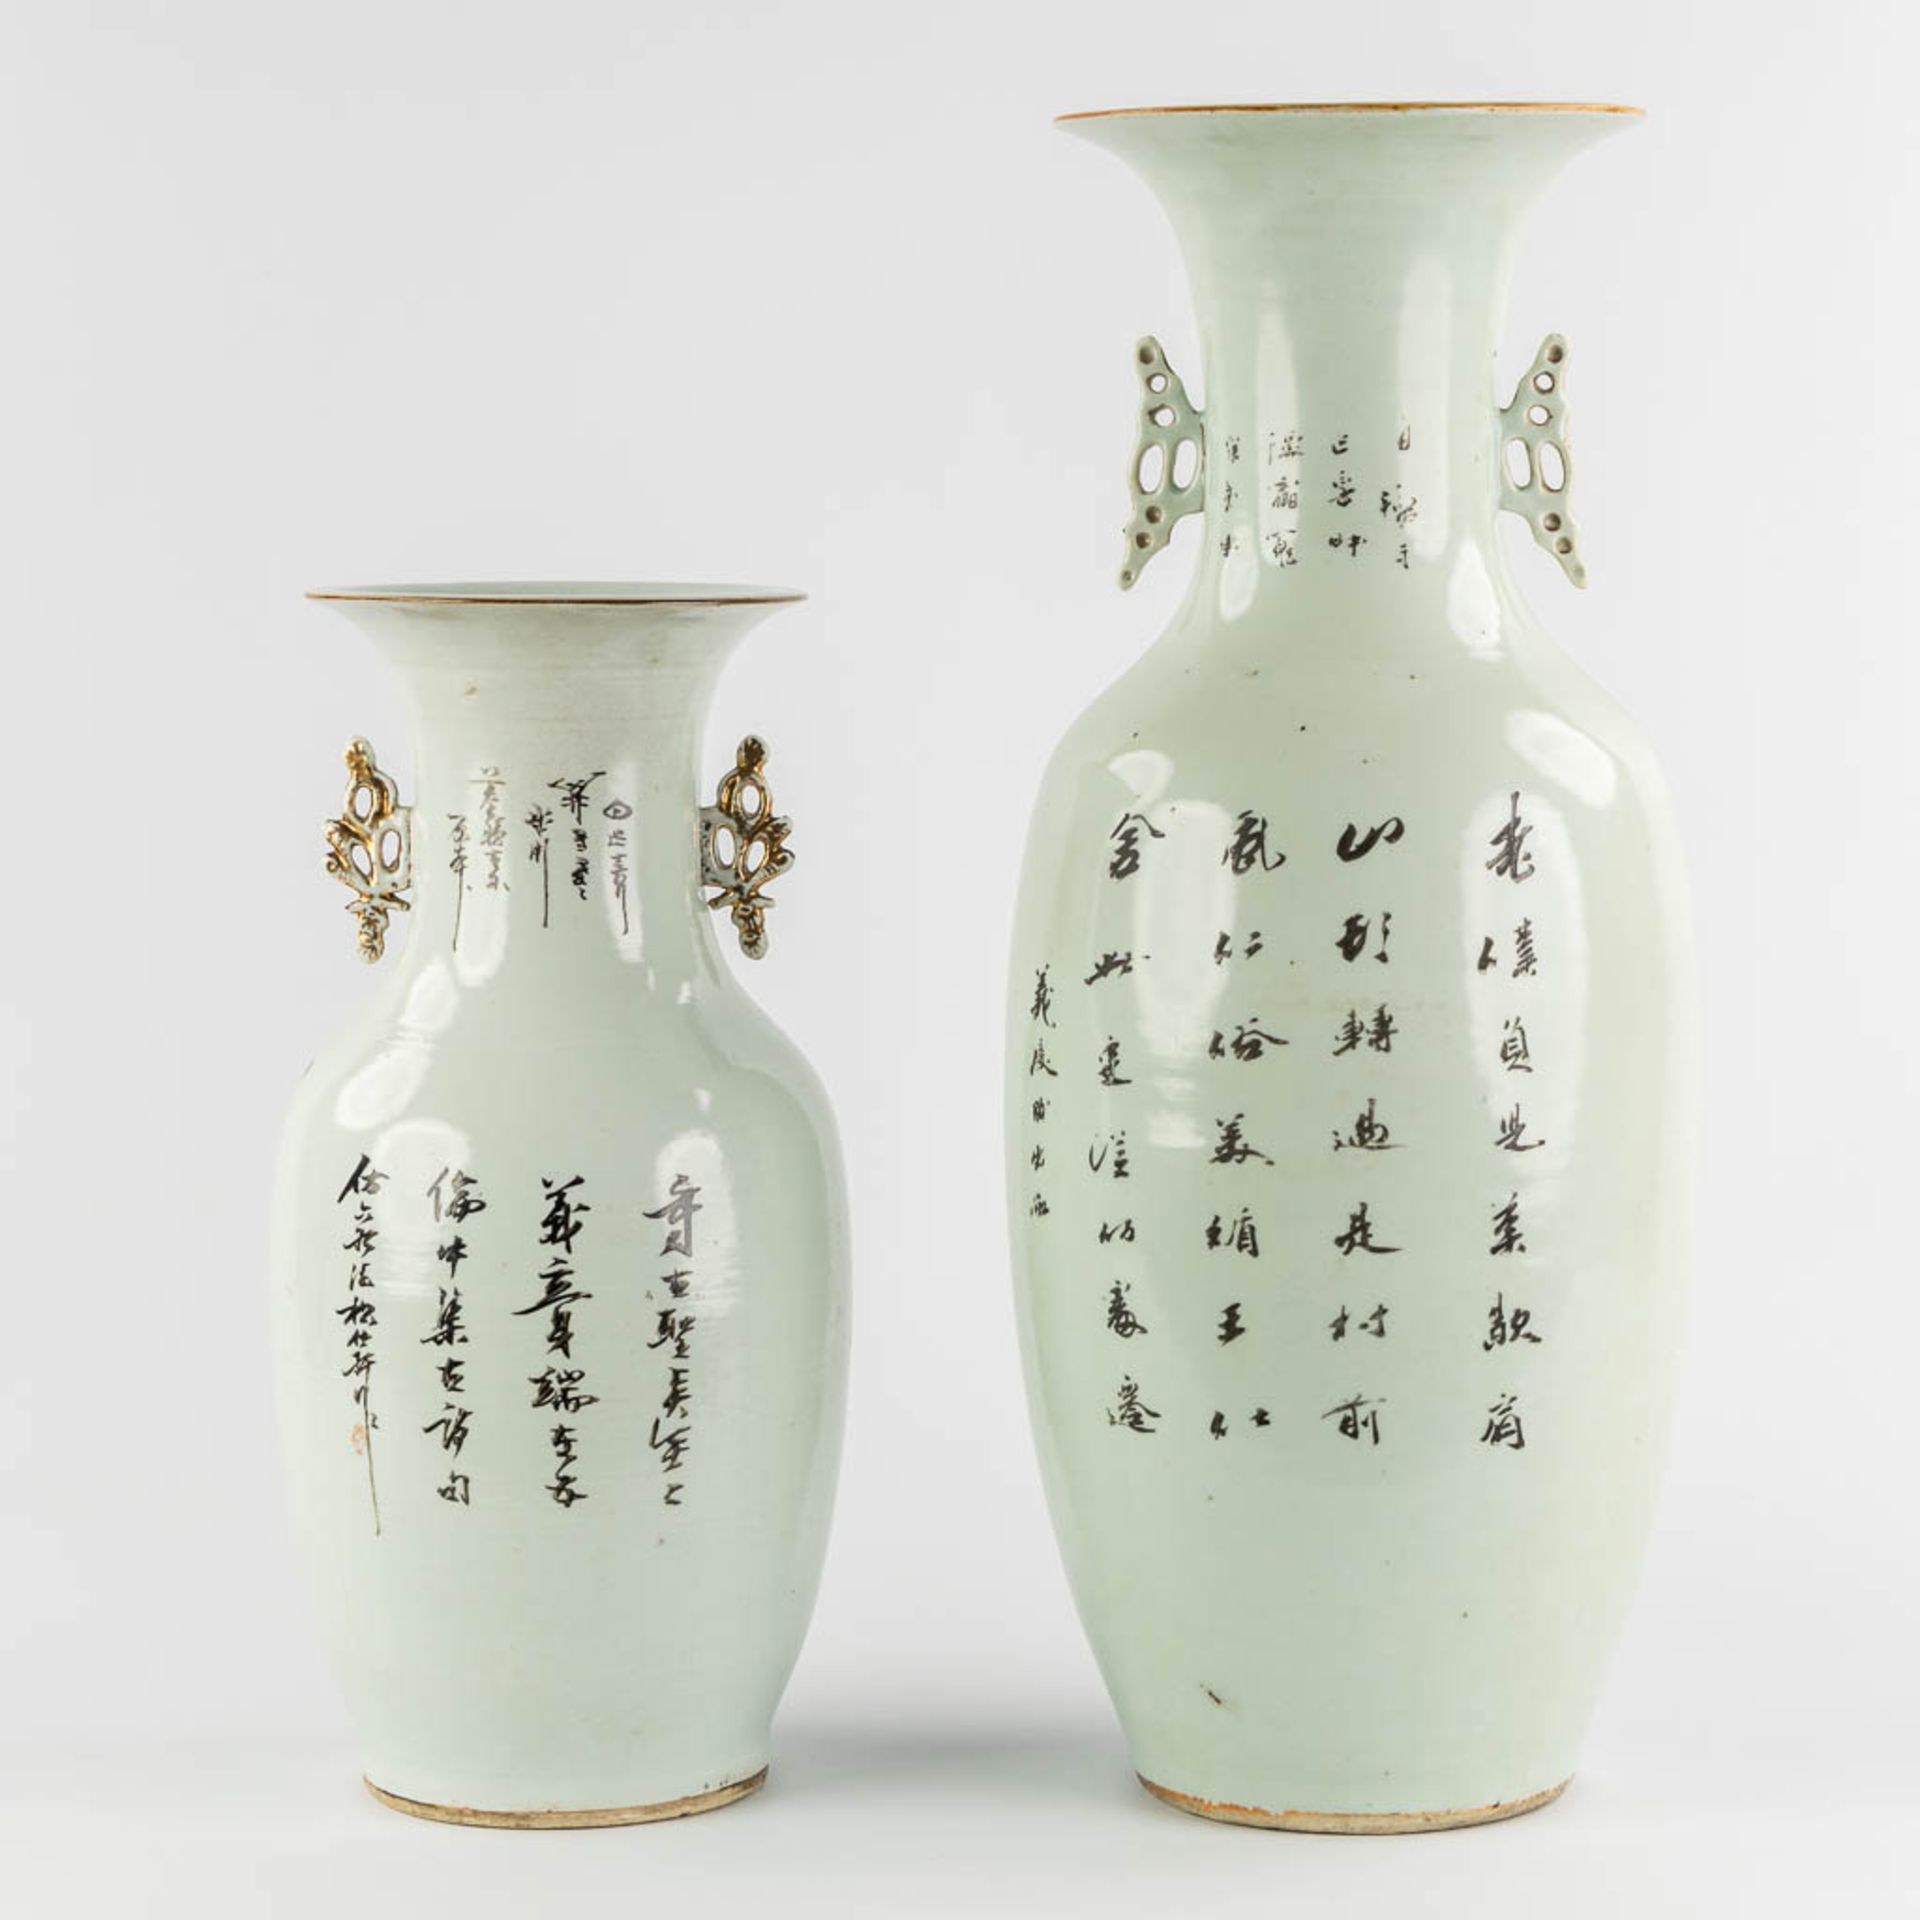 Two Chinese Famille Rose vases decorated with figurines. 19th/20th C. (H:58 x D:23 cm) - Image 5 of 15